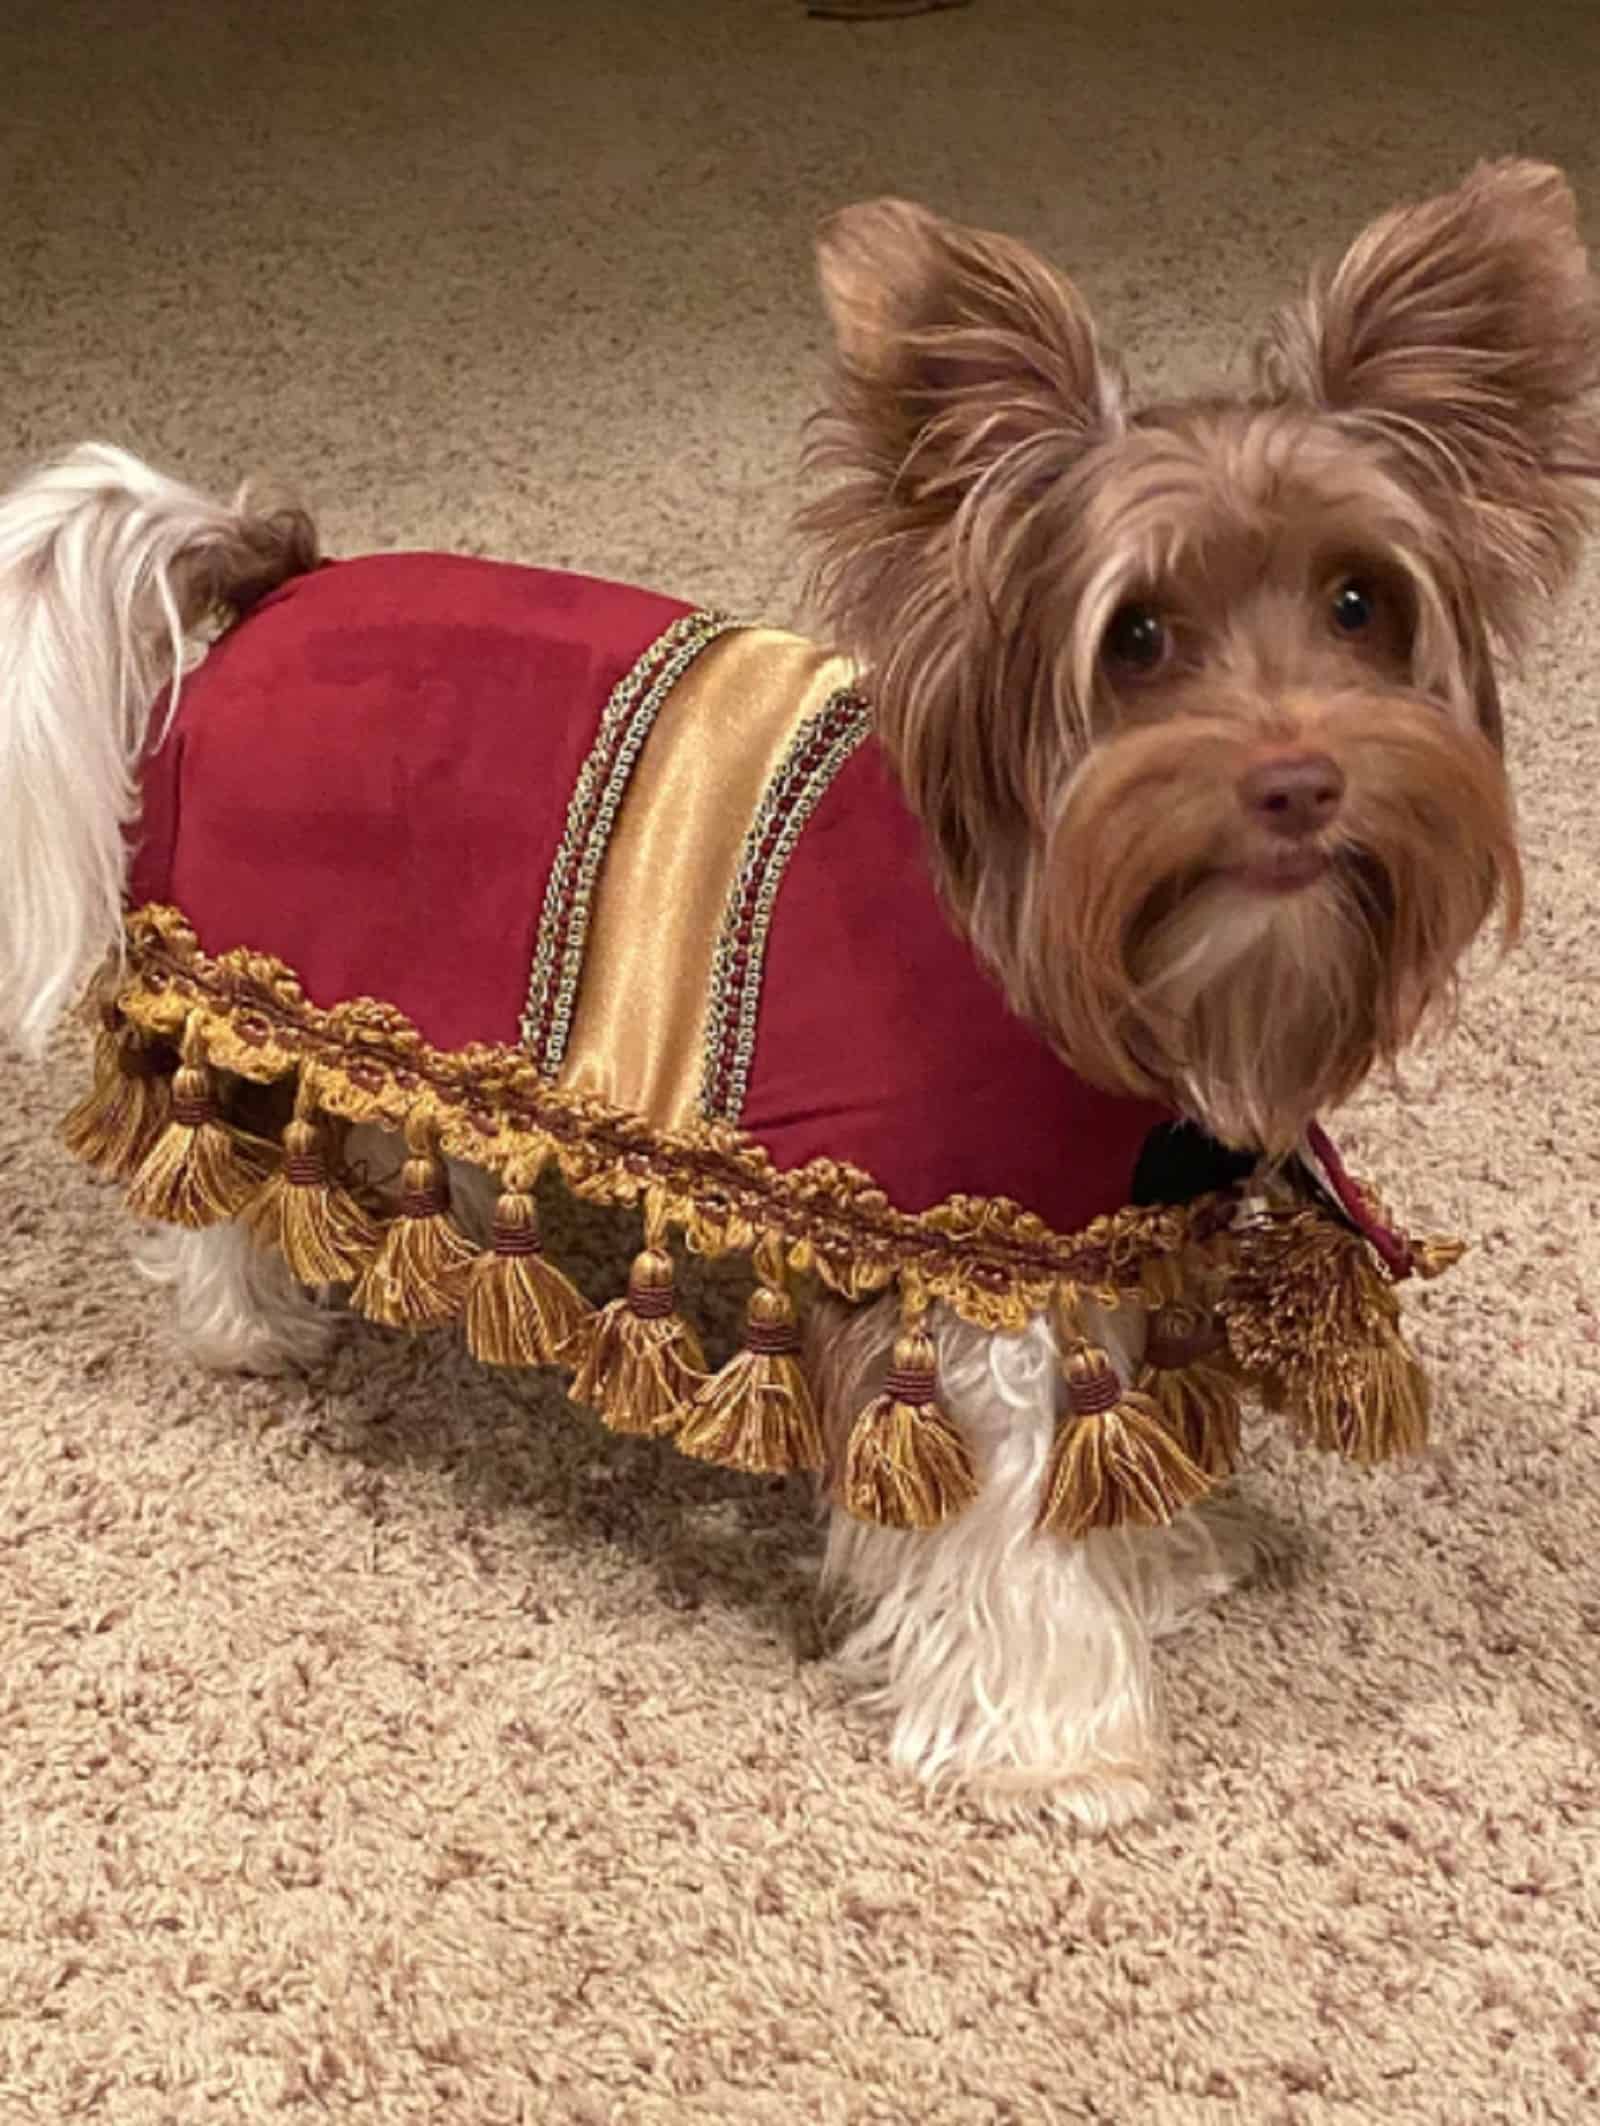 dog wearing footstool costume standing on the carpet